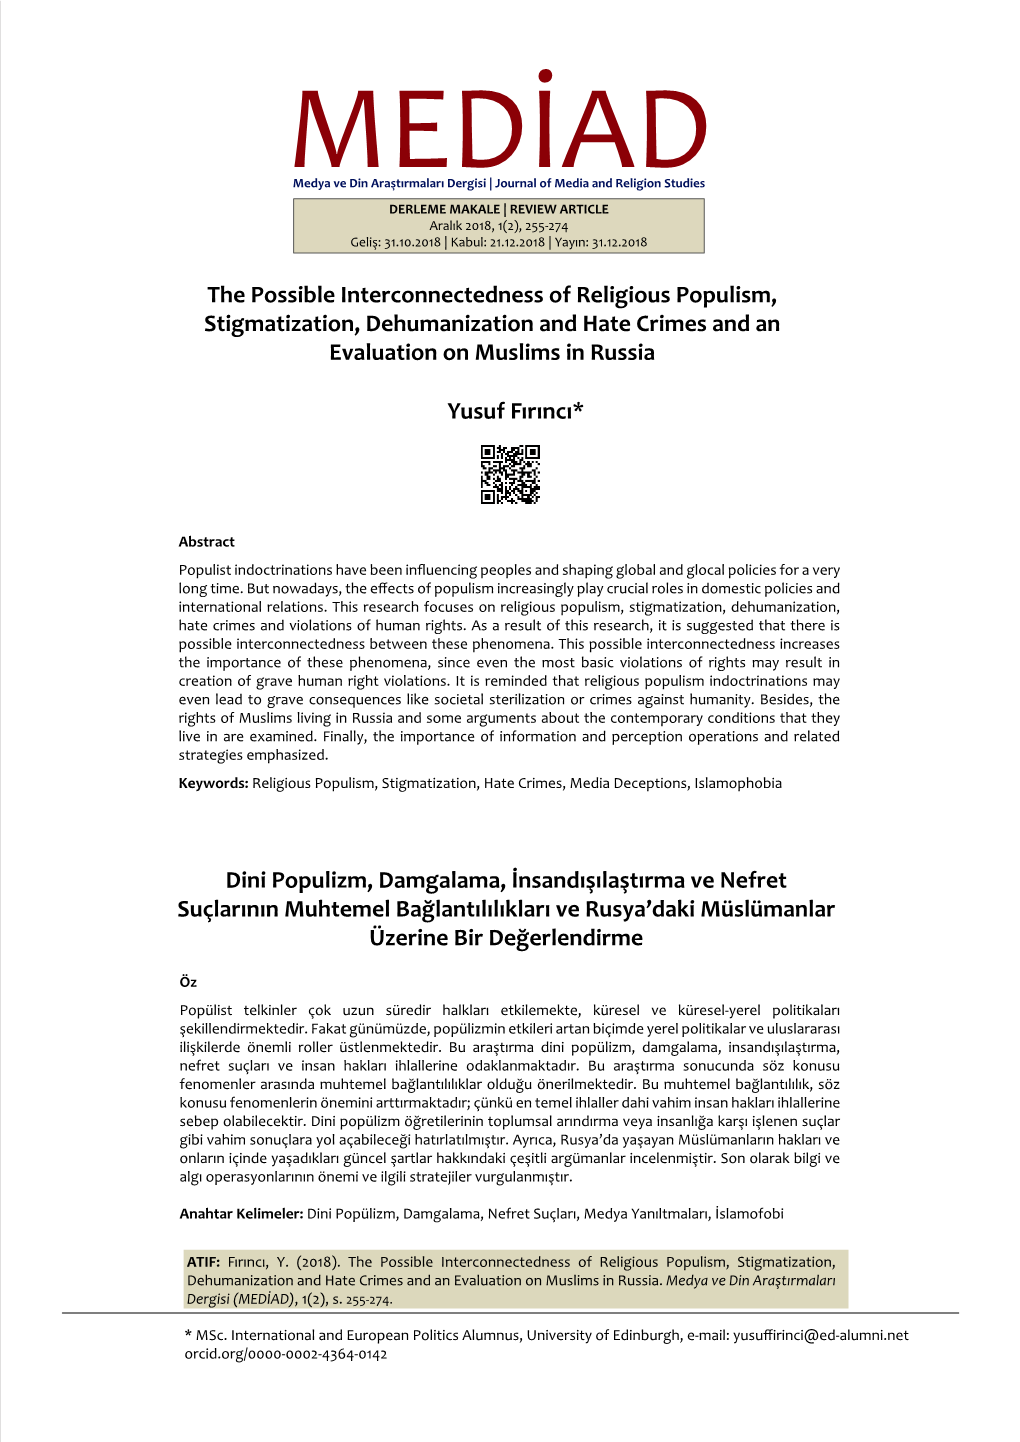 The Possible Interconnectedness of Religious Populism, Stigmatization, Dehumanization and Hate Crimes and an Evaluation on Muslims in Russia